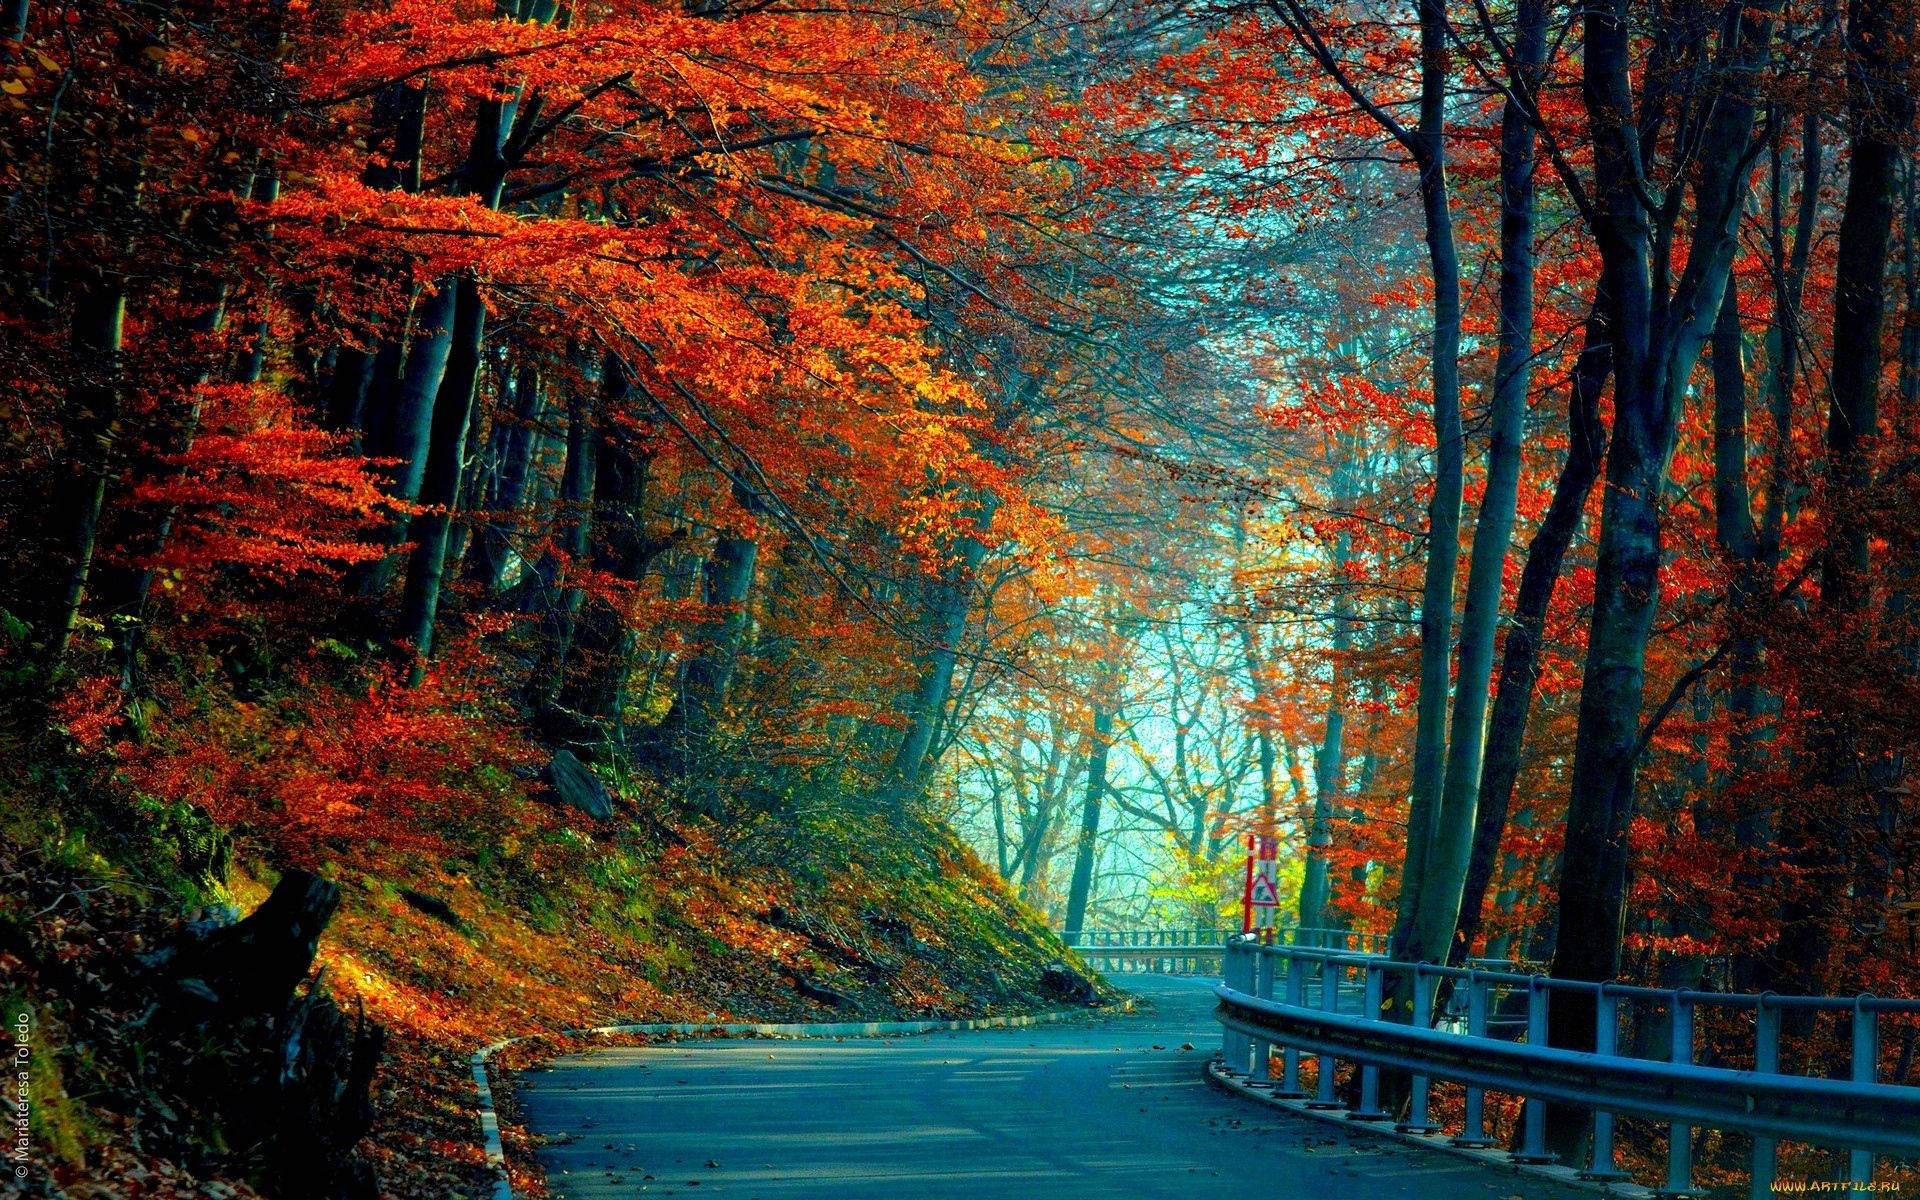 Winding road with orange maple trees on a morning during autumn season.